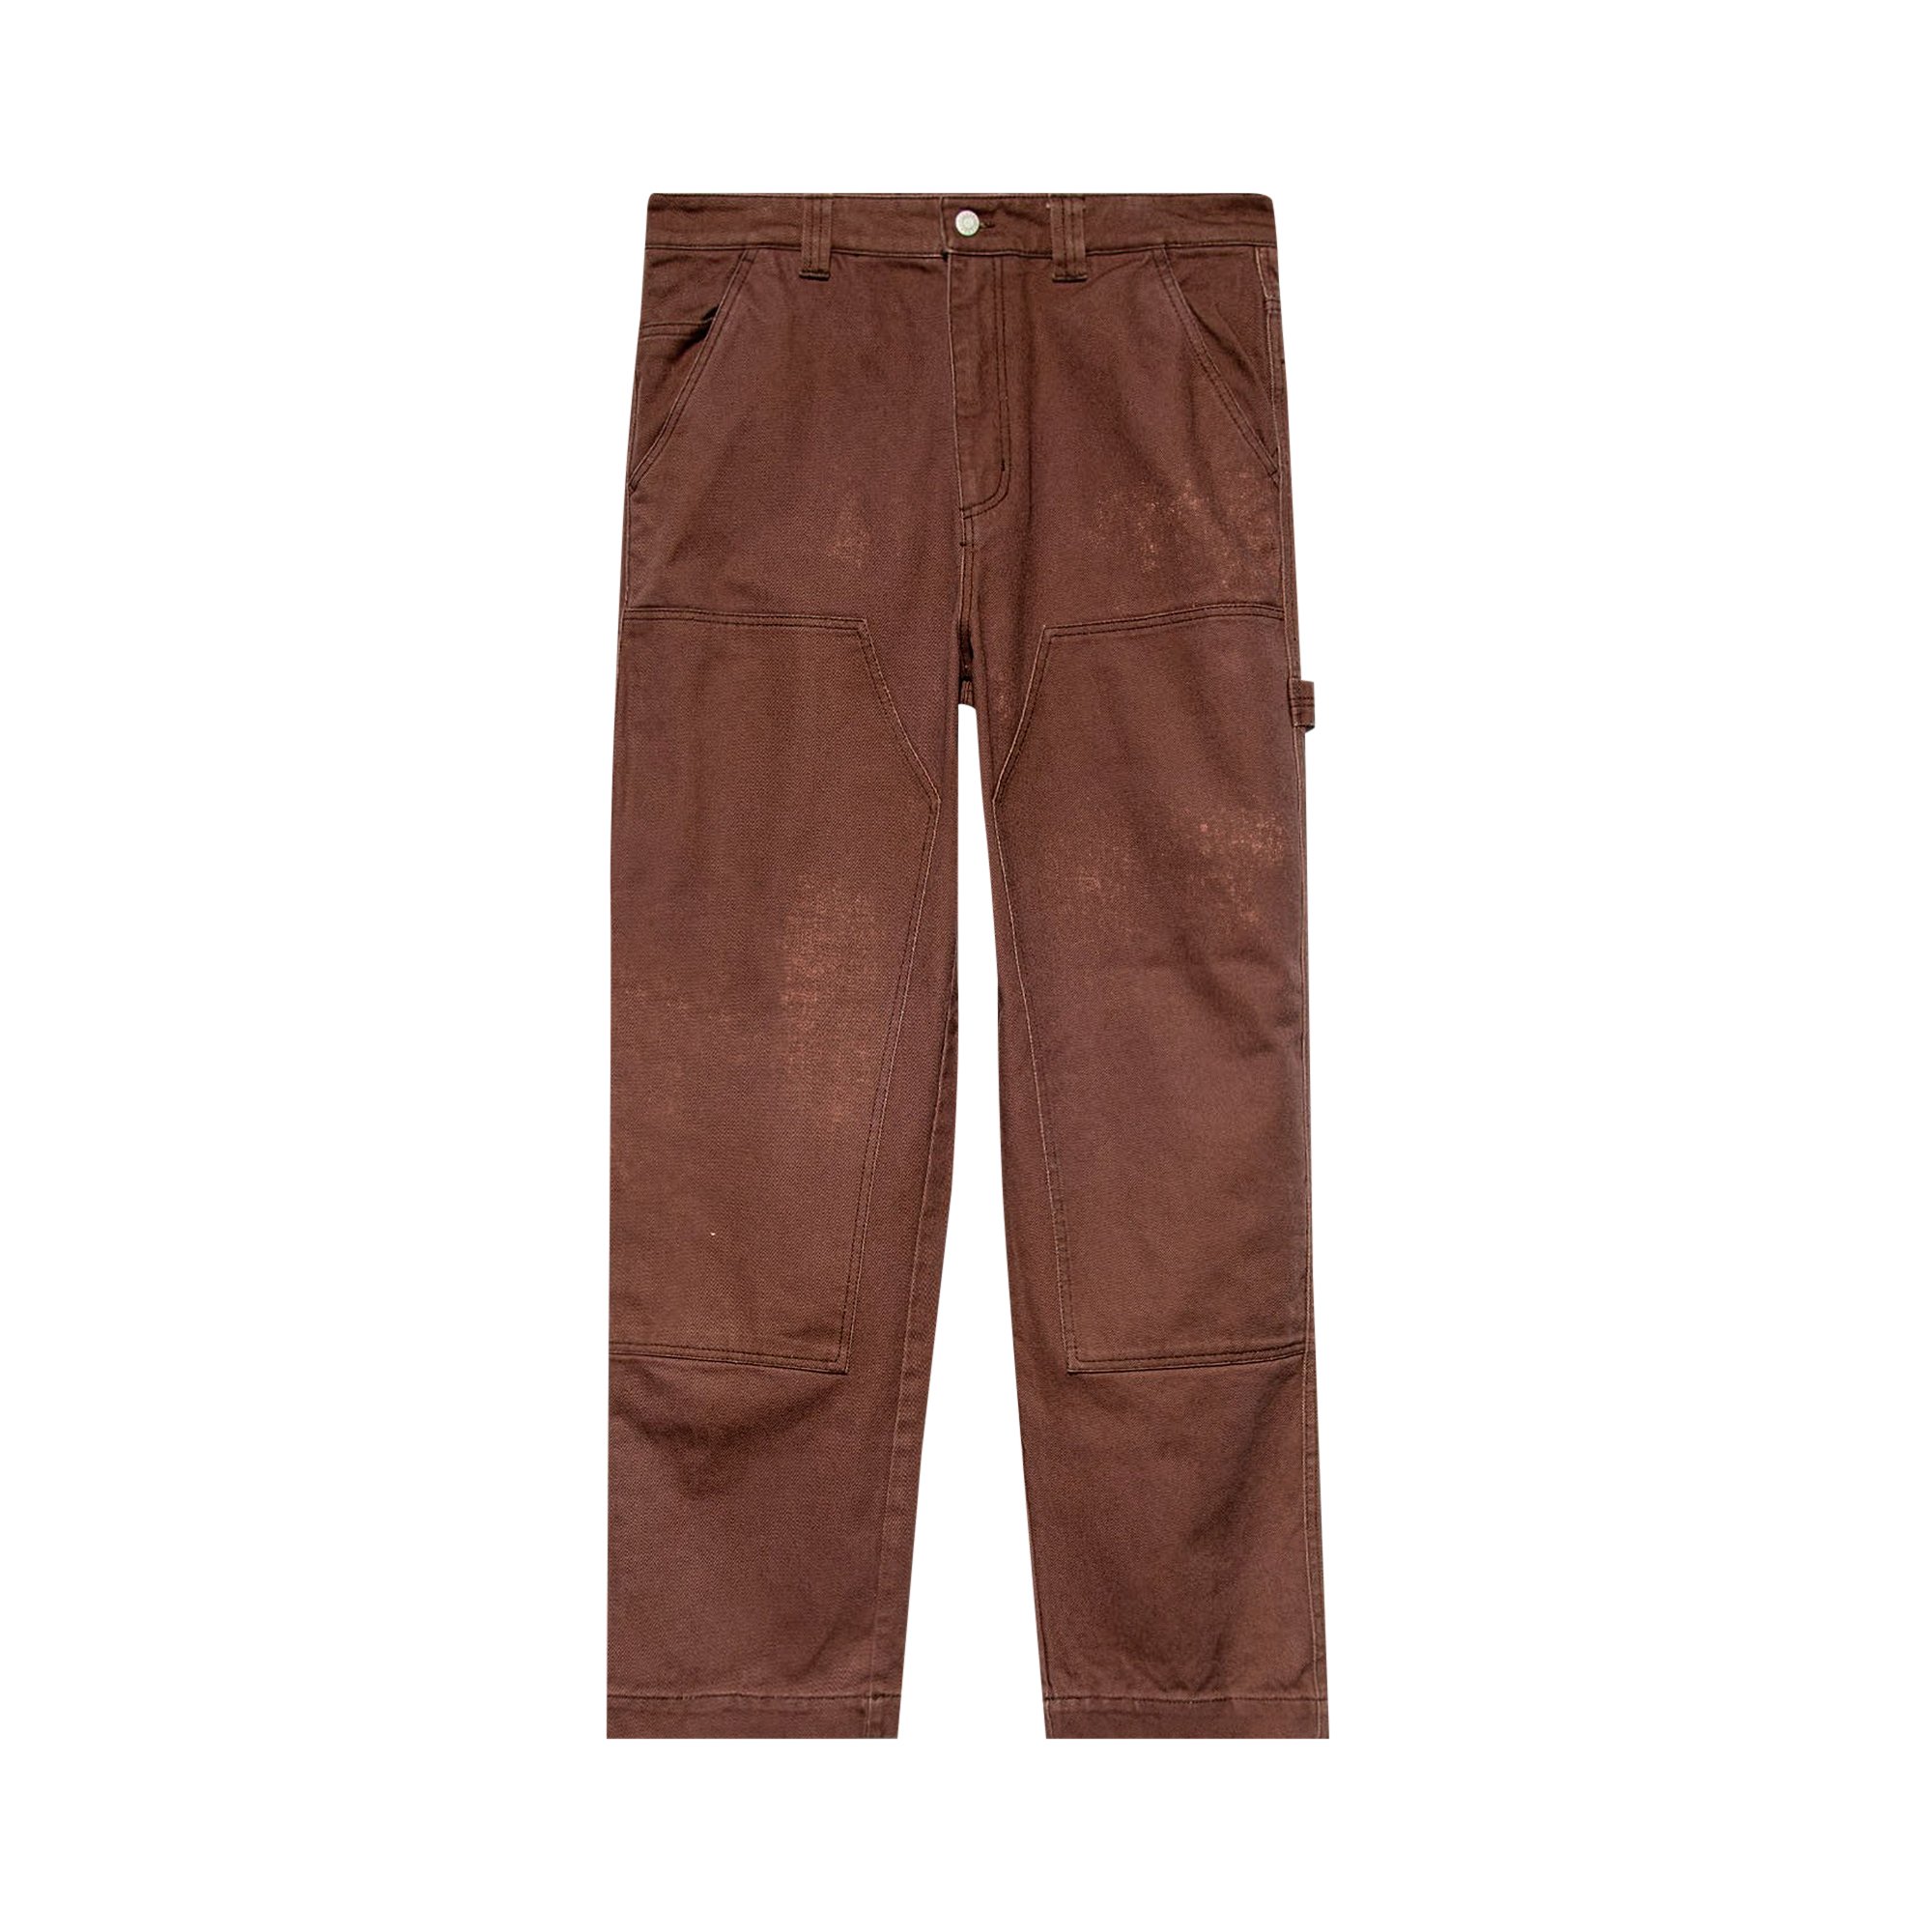 Buy Stussy Spotted Bleach Work Pant 'Brown' - 116486 BROW | GOAT